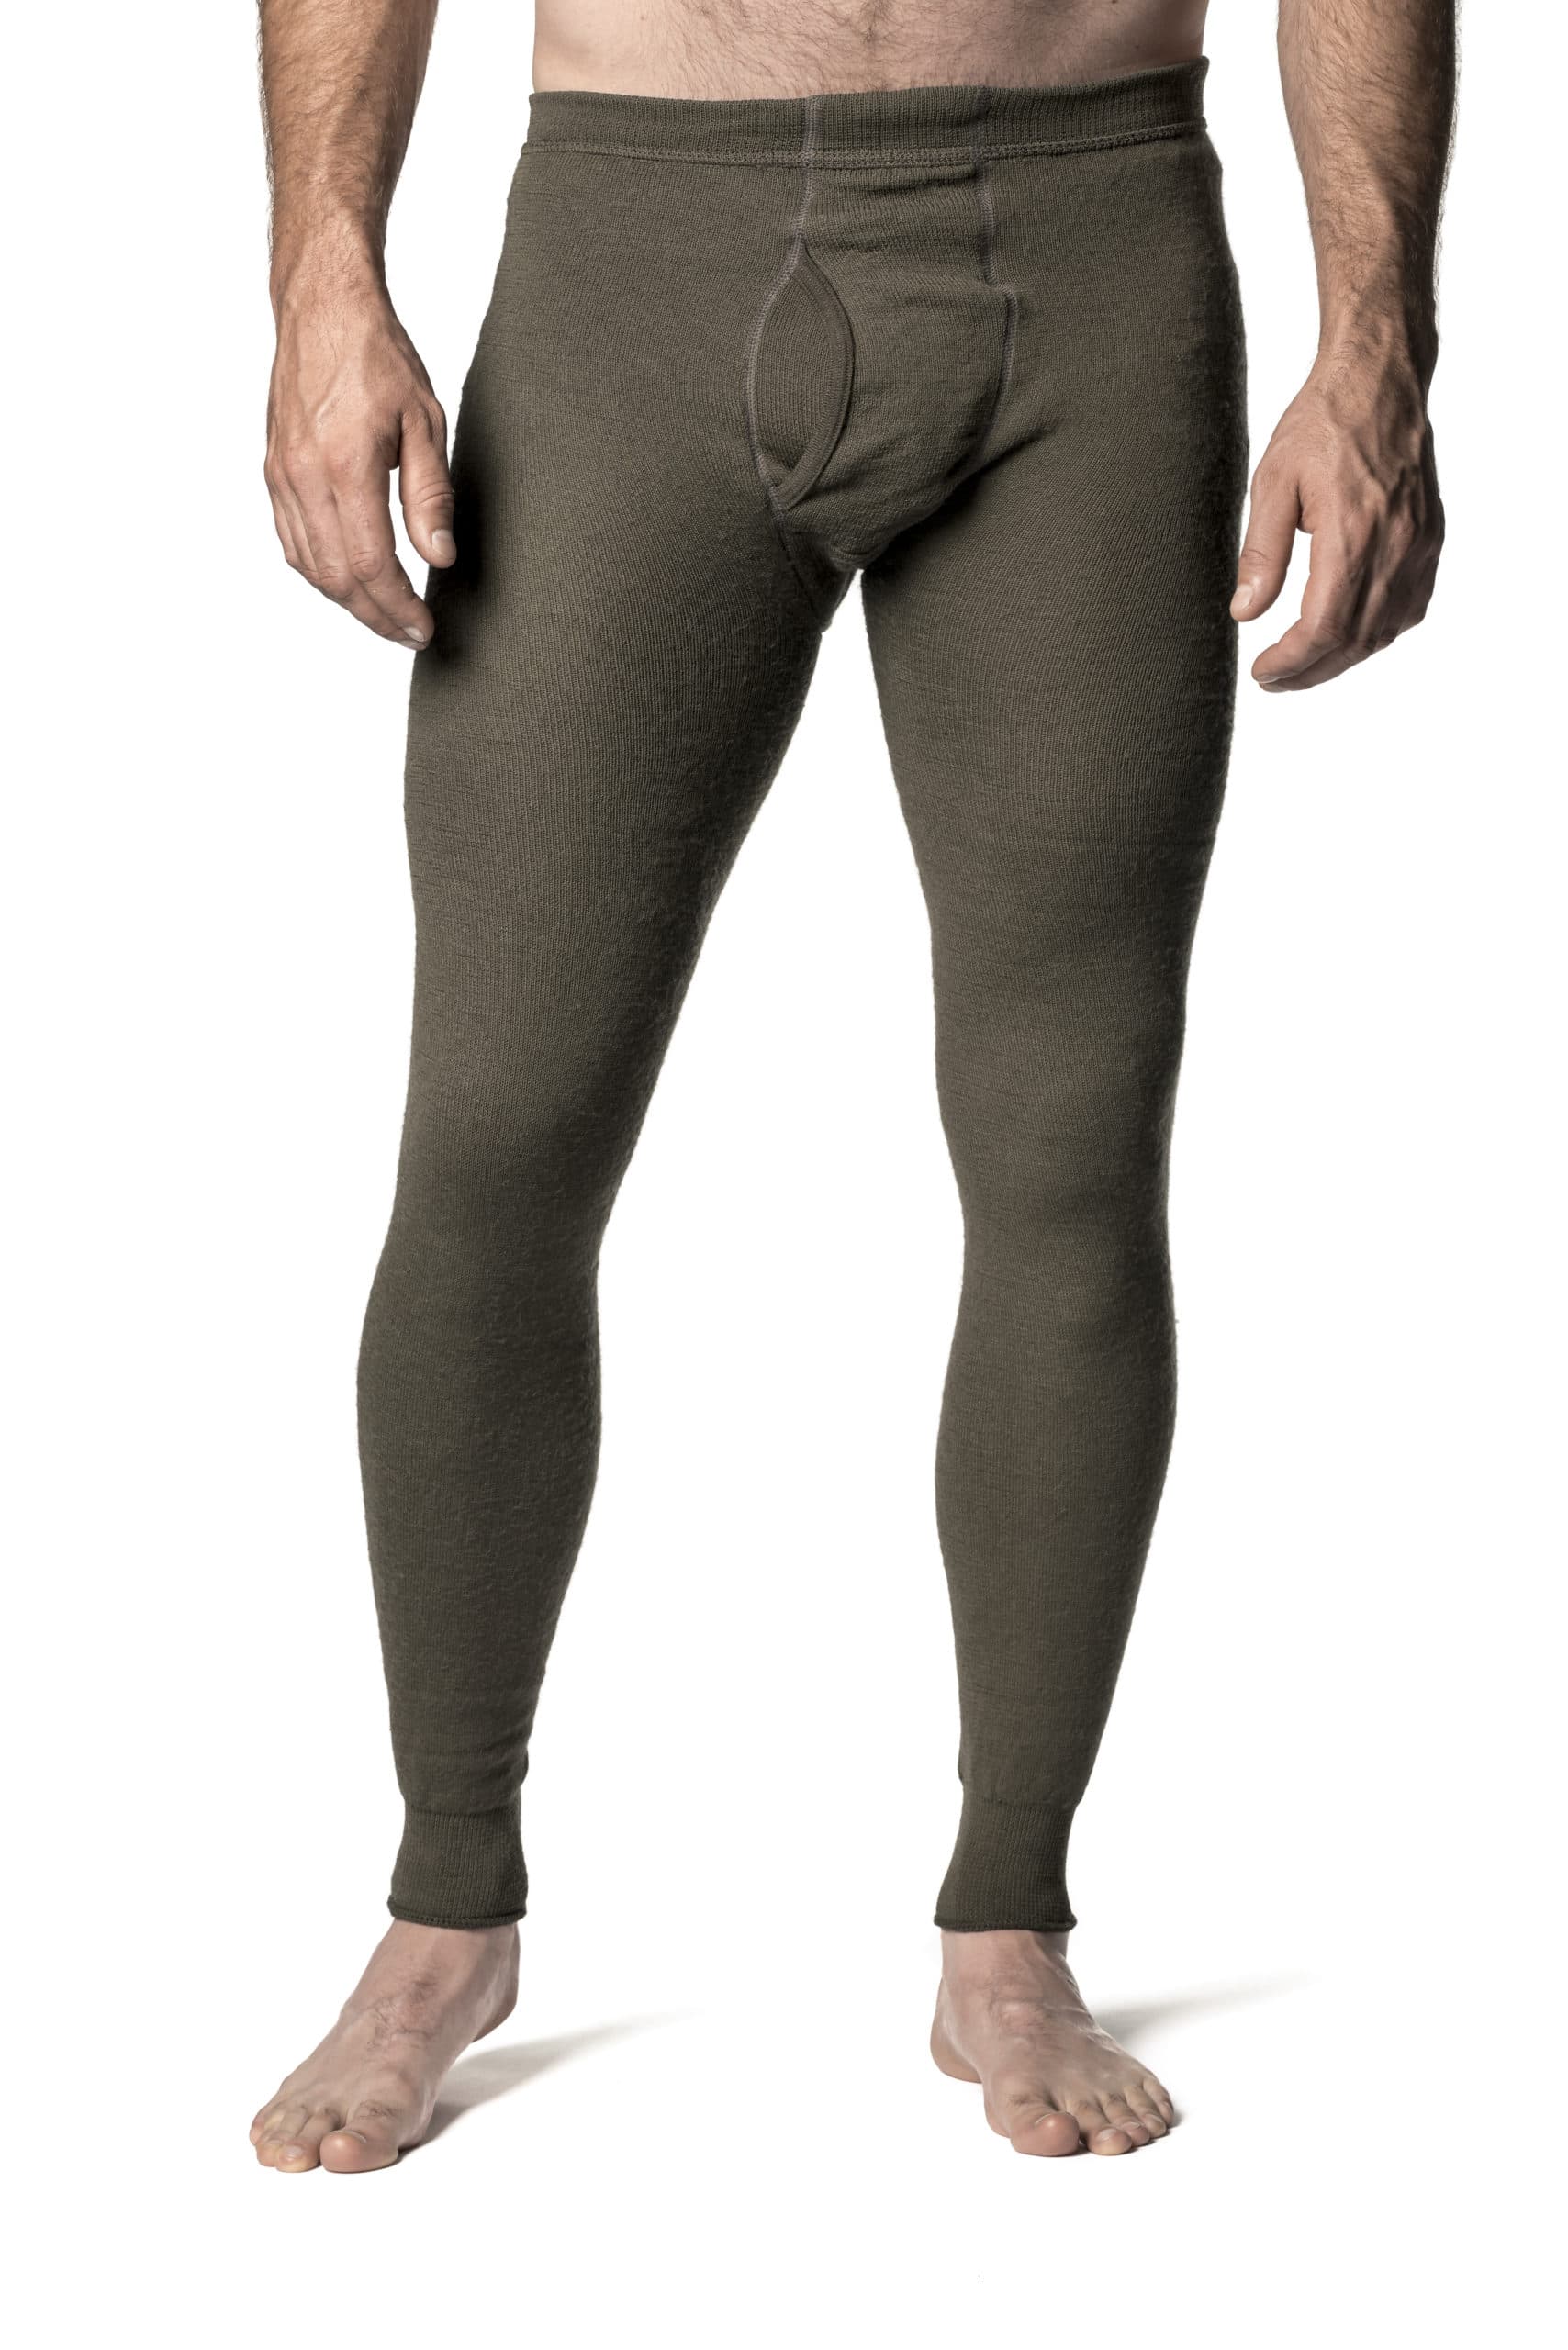 https://wslackandsons.co.uk/wp-content/uploads/2018/09/Long-Johns-with-Fly-200-6342-pine-green-front-scaled.jpg